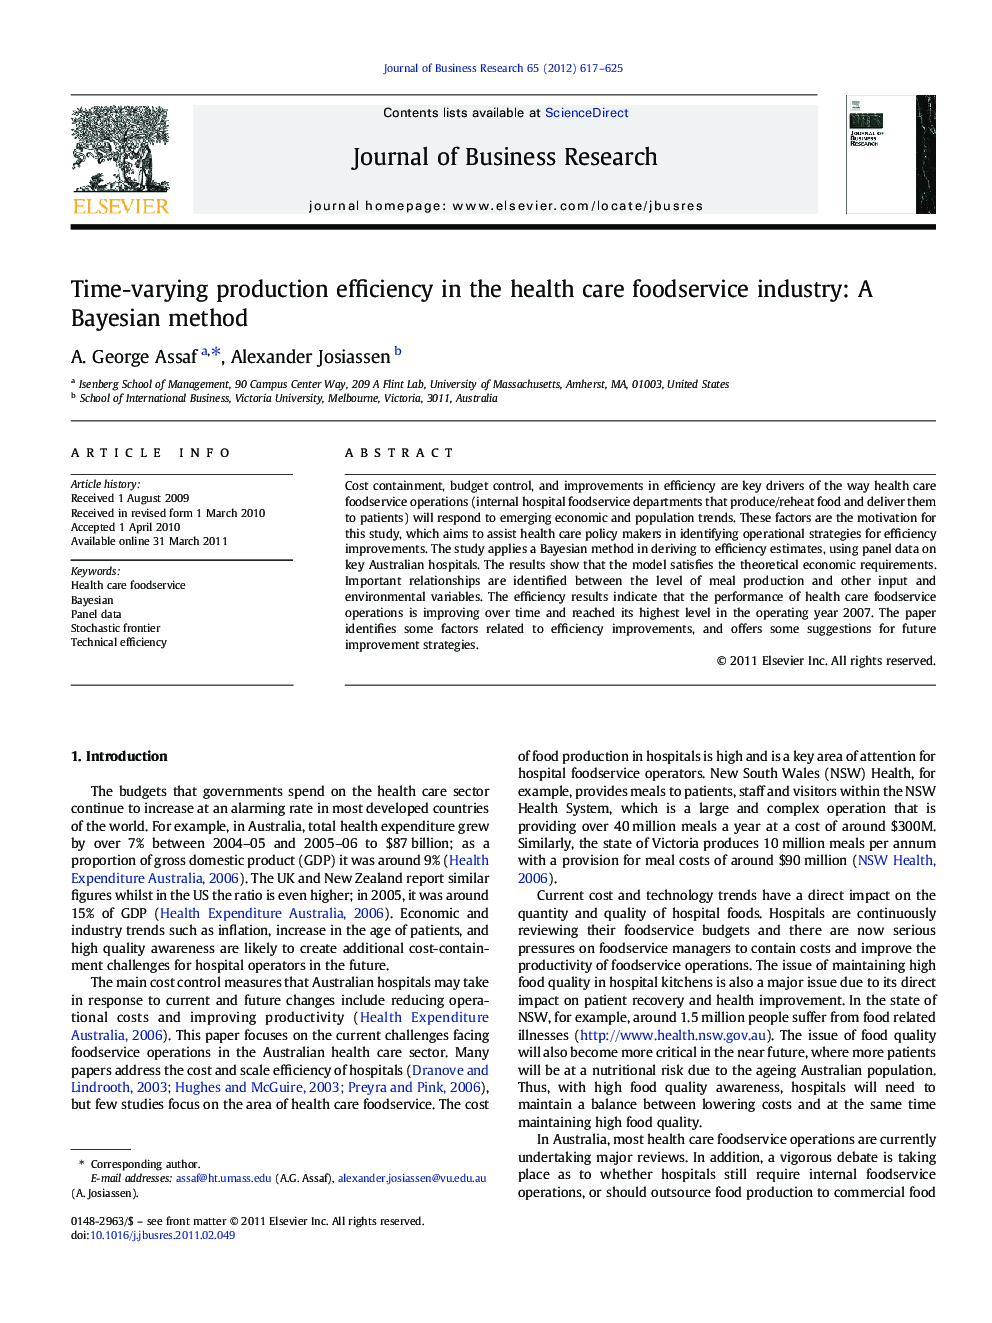 Time-varying production efficiency in the health care foodservice industry: A Bayesian method